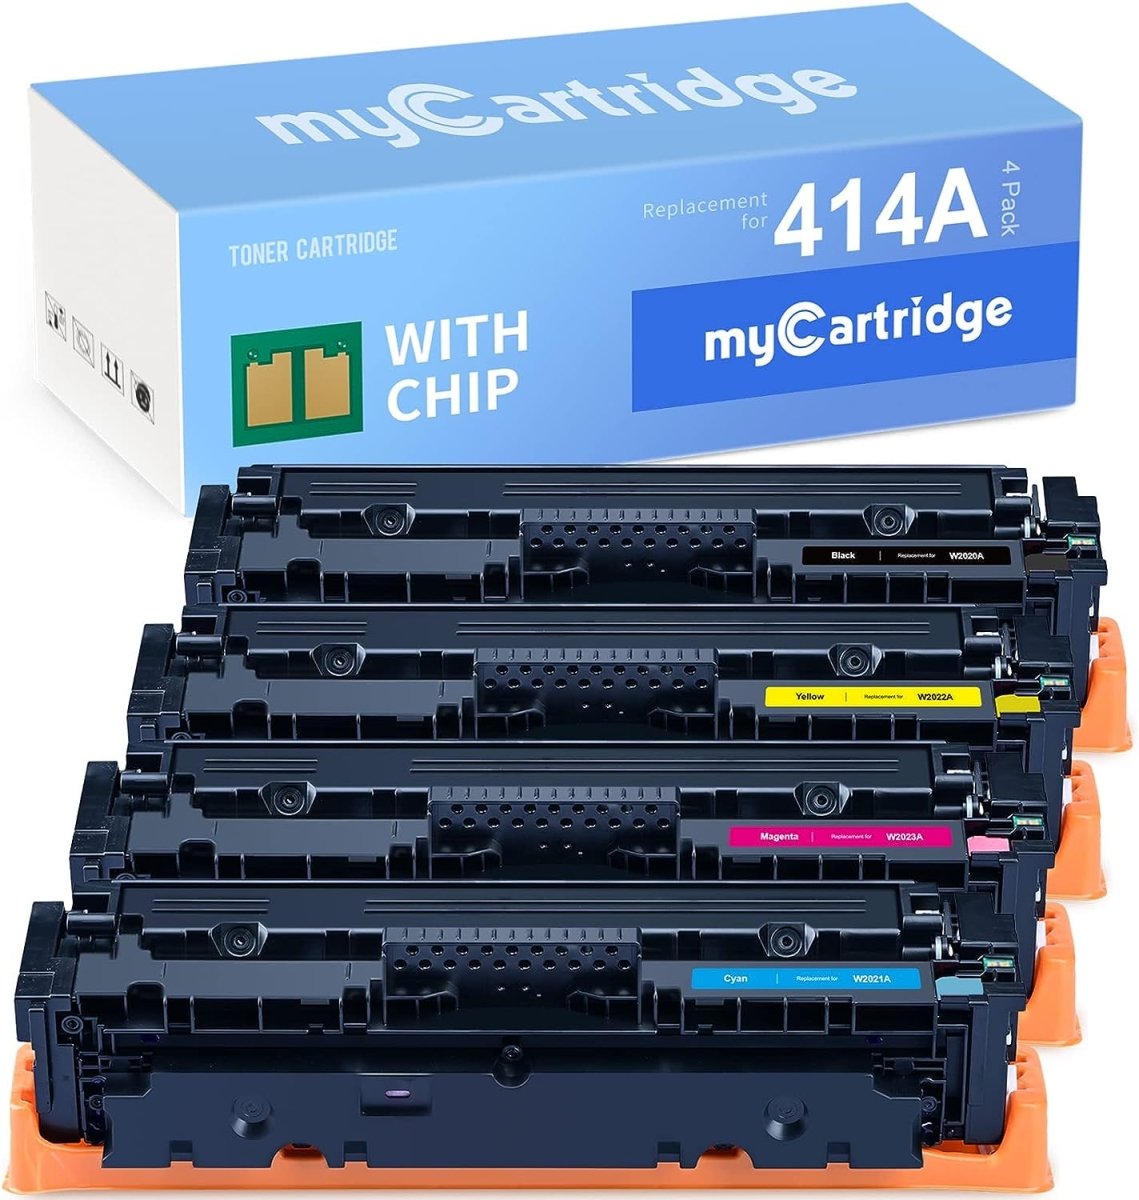 414A W2020A (with chip) Compatible HP Toner Cartridge Black Cyan Magenta Yellow 4-Pack - Linford Office:Printer Ink & Toner Cartridge